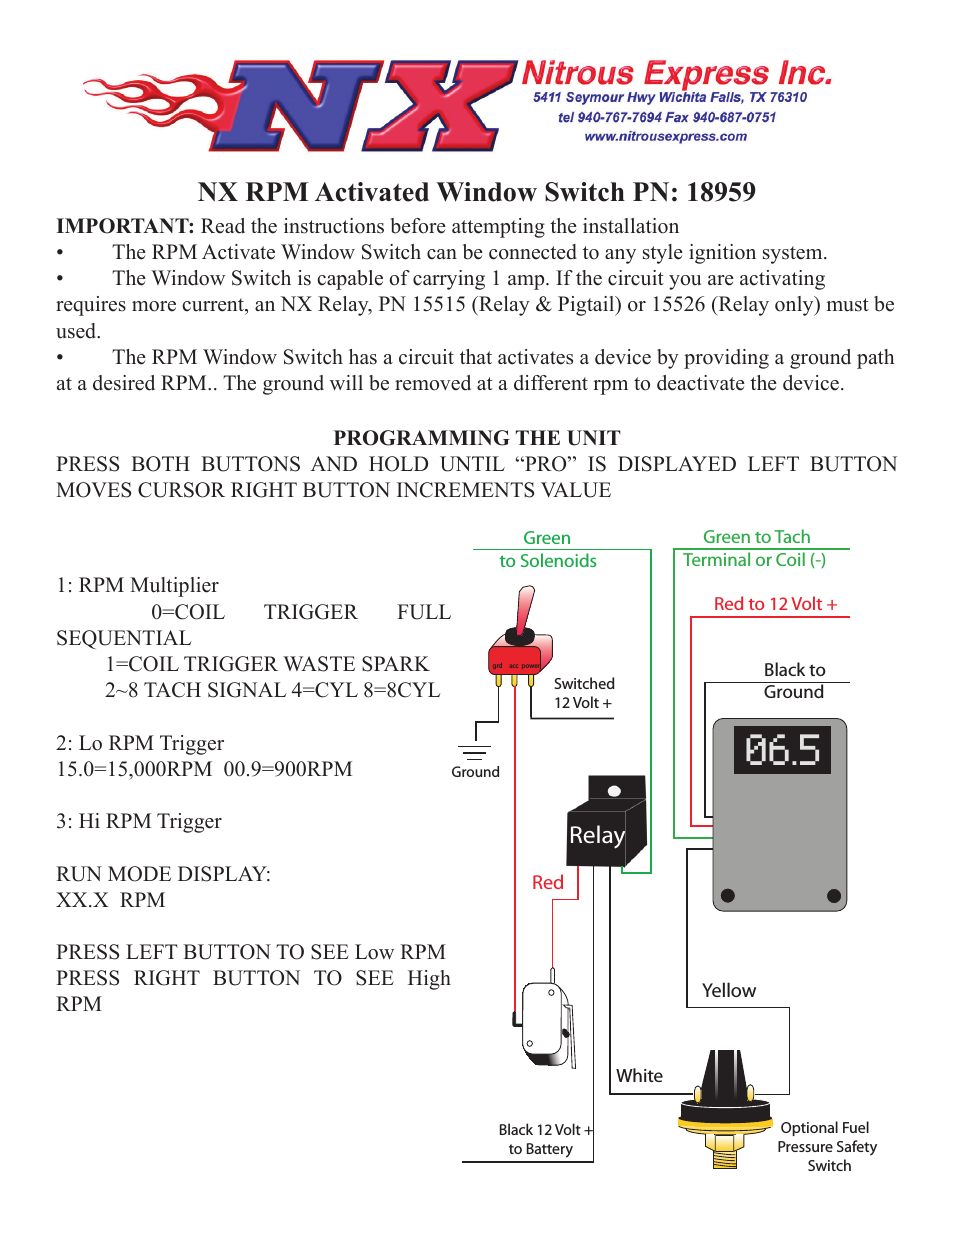 NX RPM ACTIVATED WINDOW SWICH (18959)